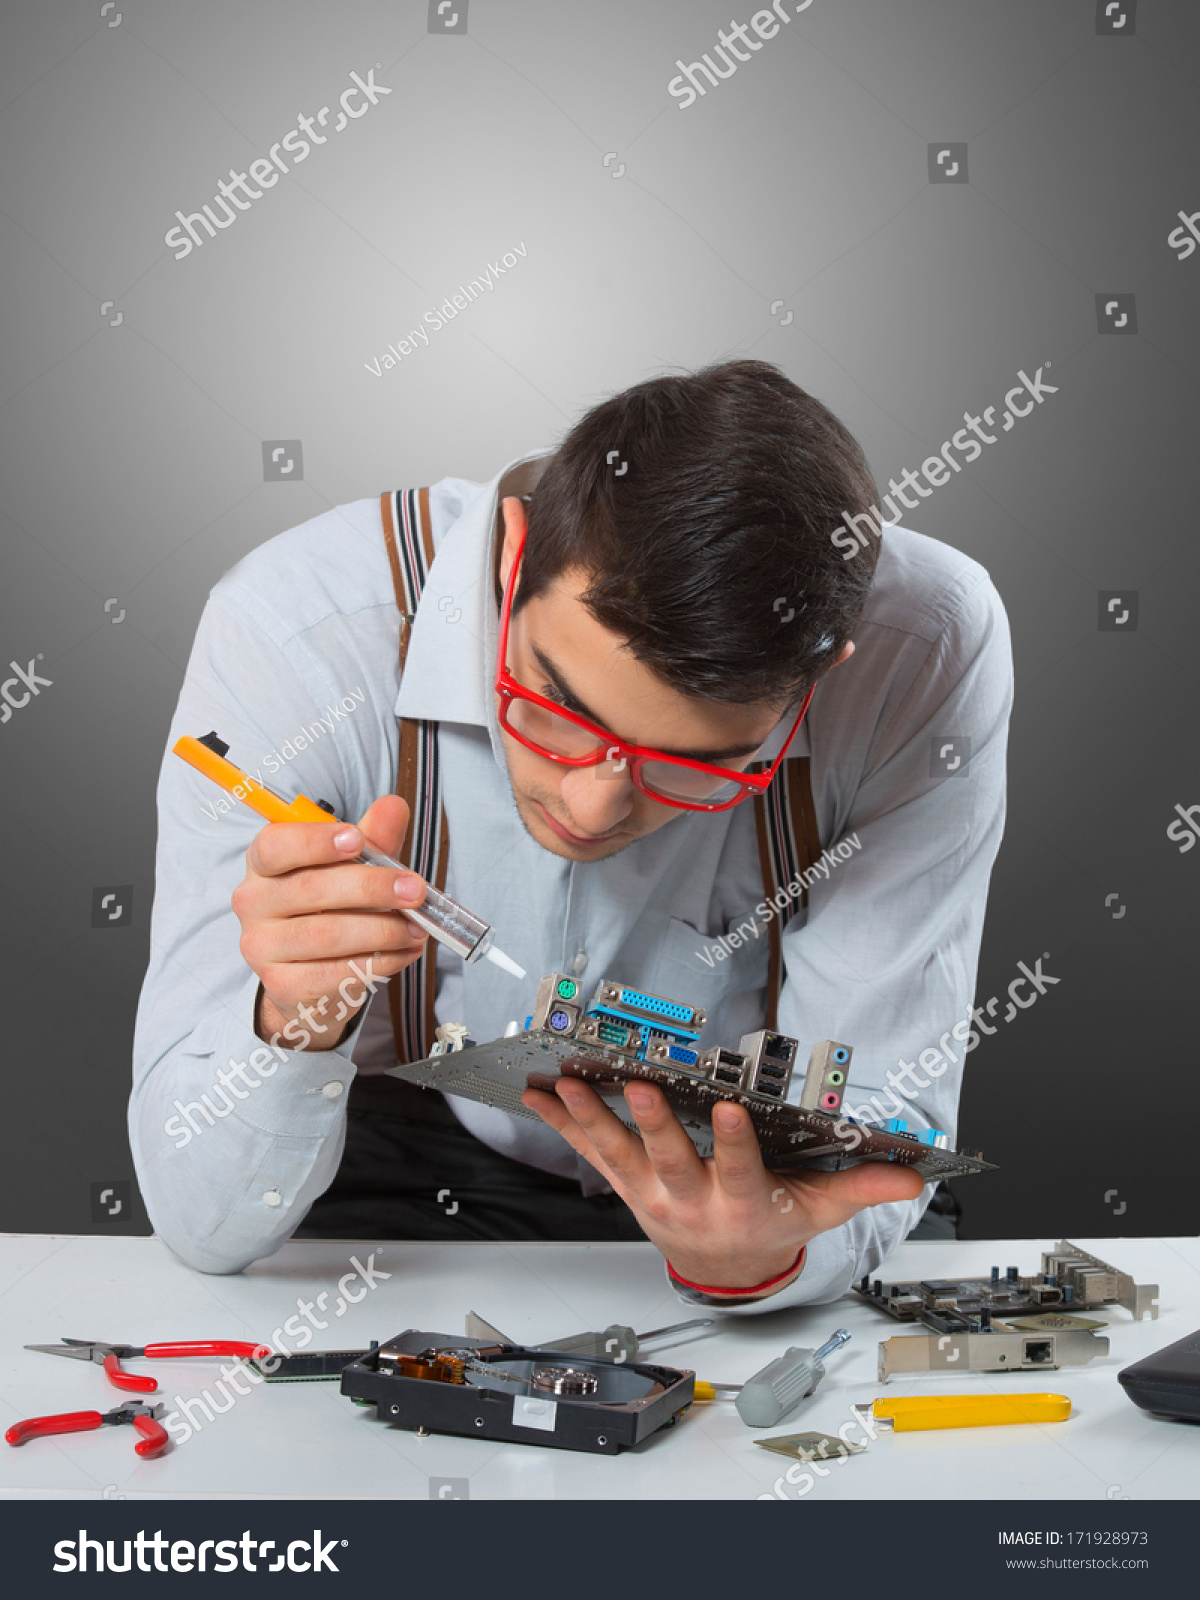 Man in red-framed glasses fixing a computer mother board, gray background #171928973